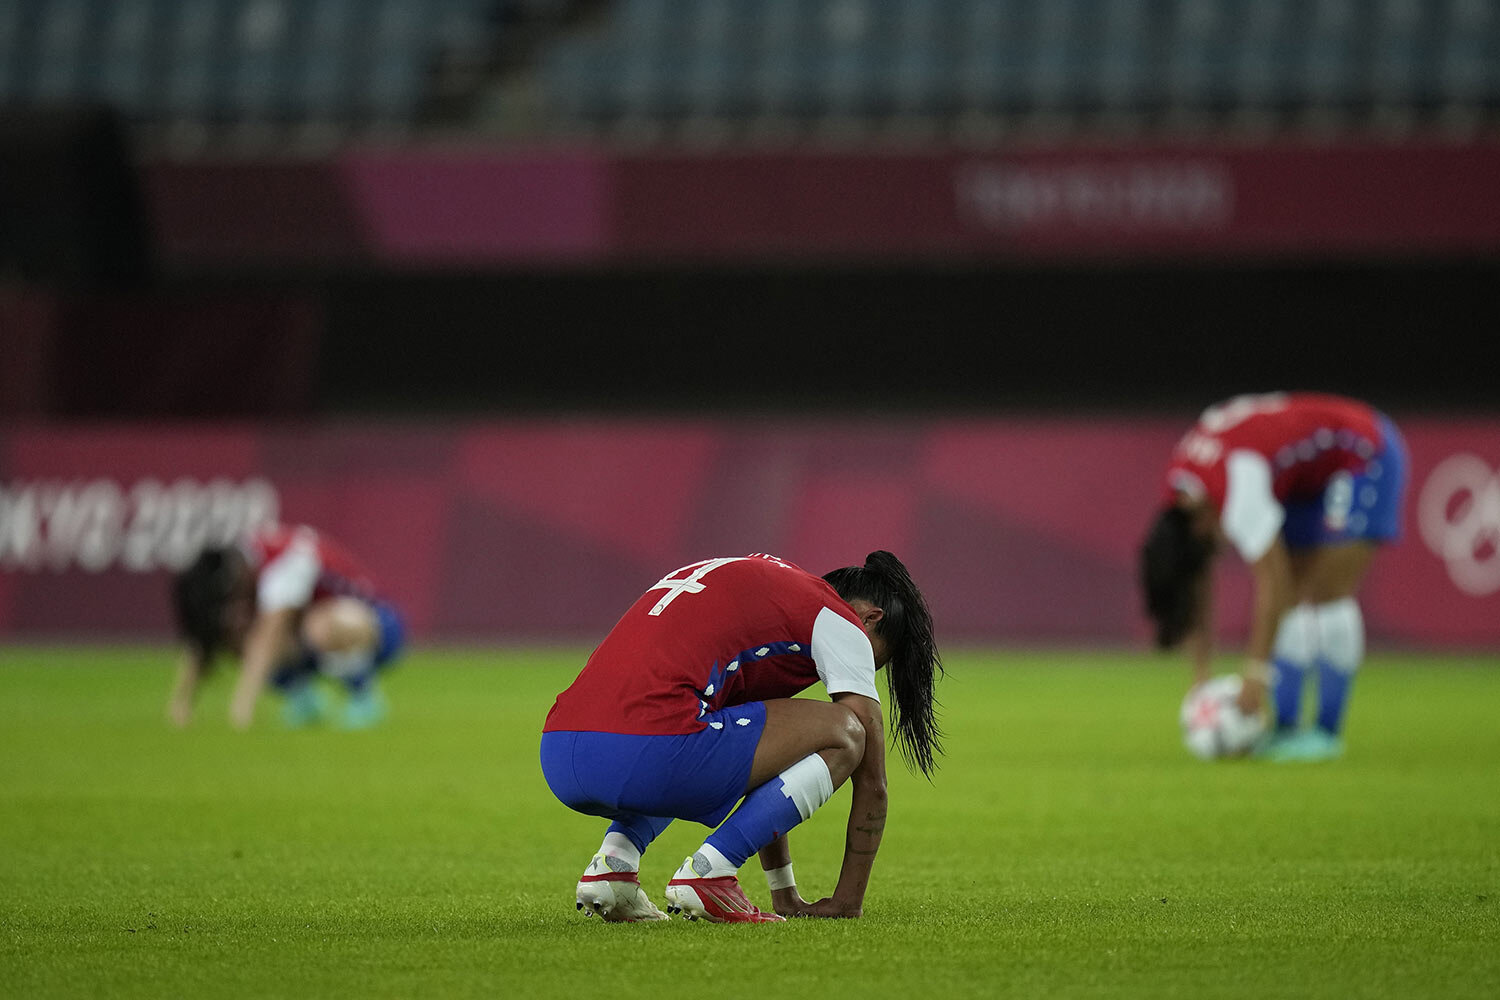  Chile's players react after losing to Japan at the end of a women's soccer match at the 2020 Summer Olympics, Tuesday, July 27, 2021, in Rifu, Japan. Japan won 1-0. (AP Photo/Andre Penner) 